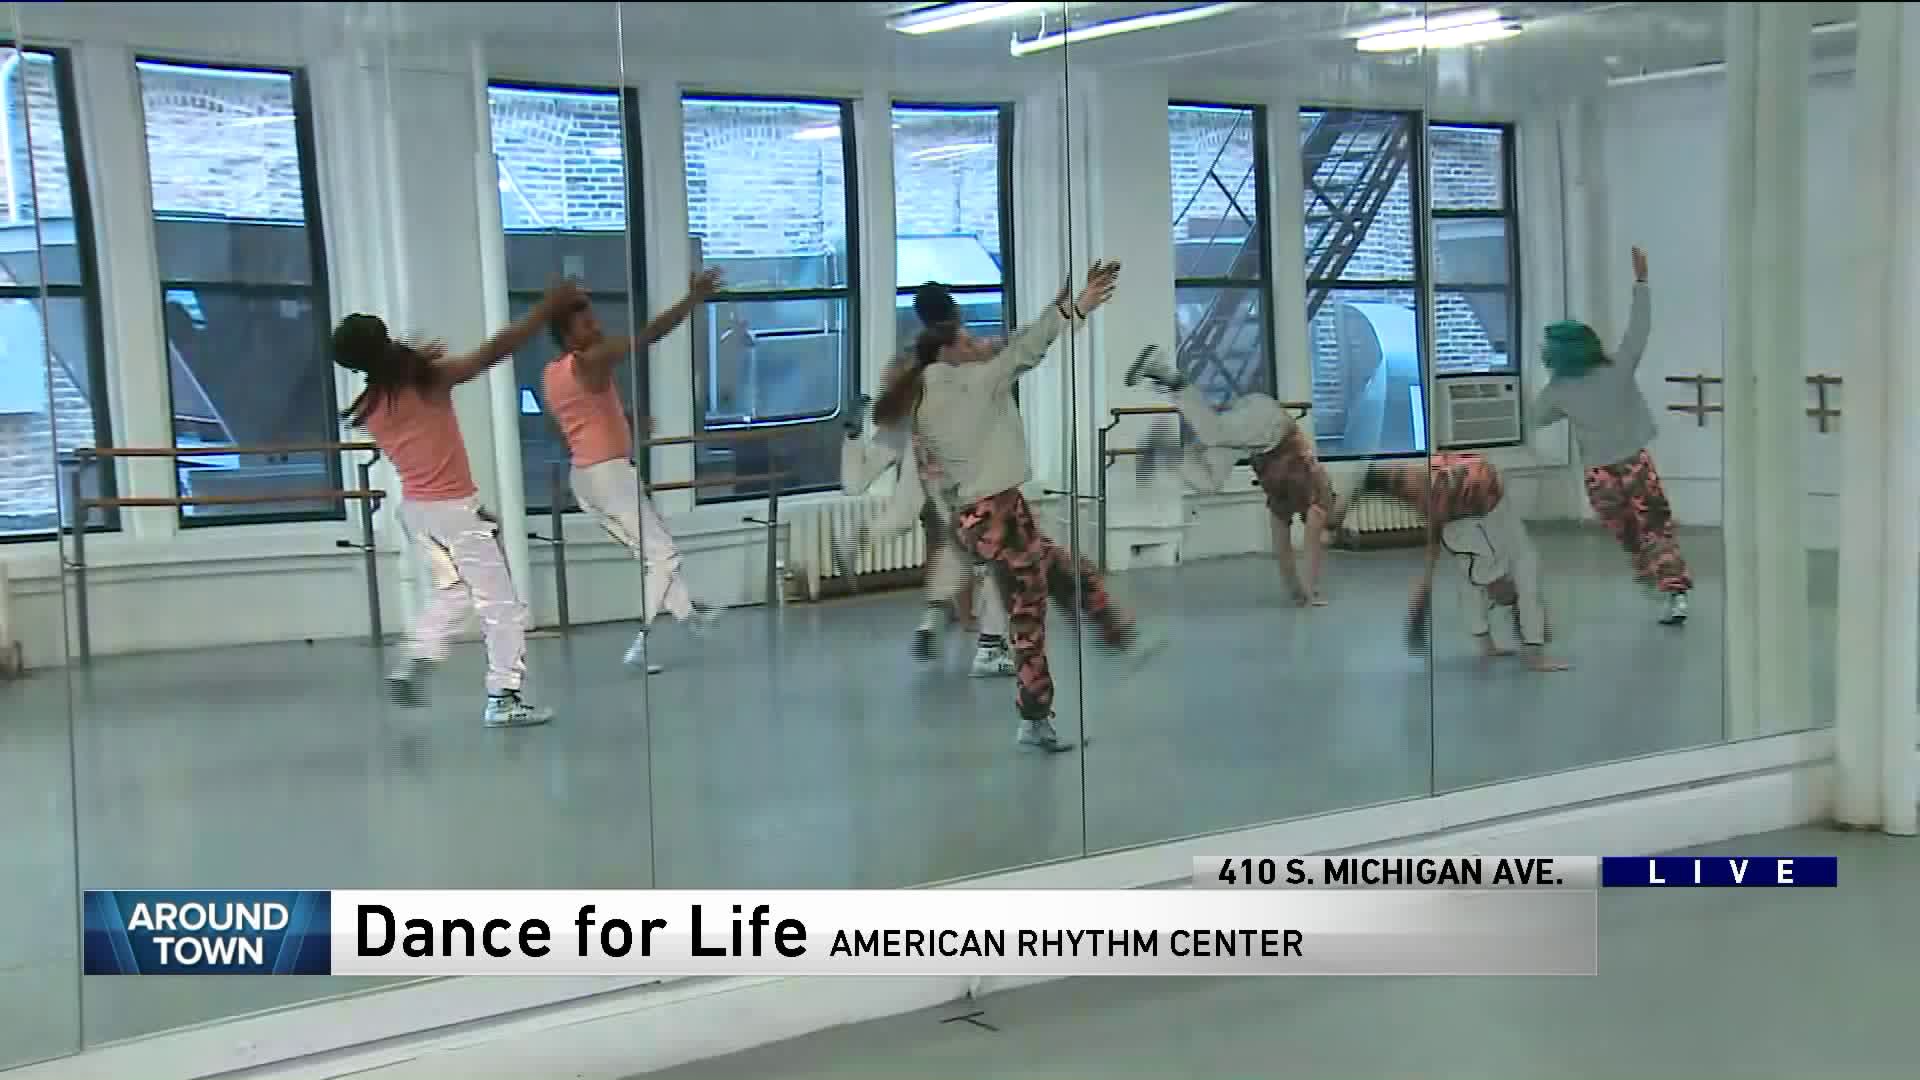 Around Town previews Dance For Life